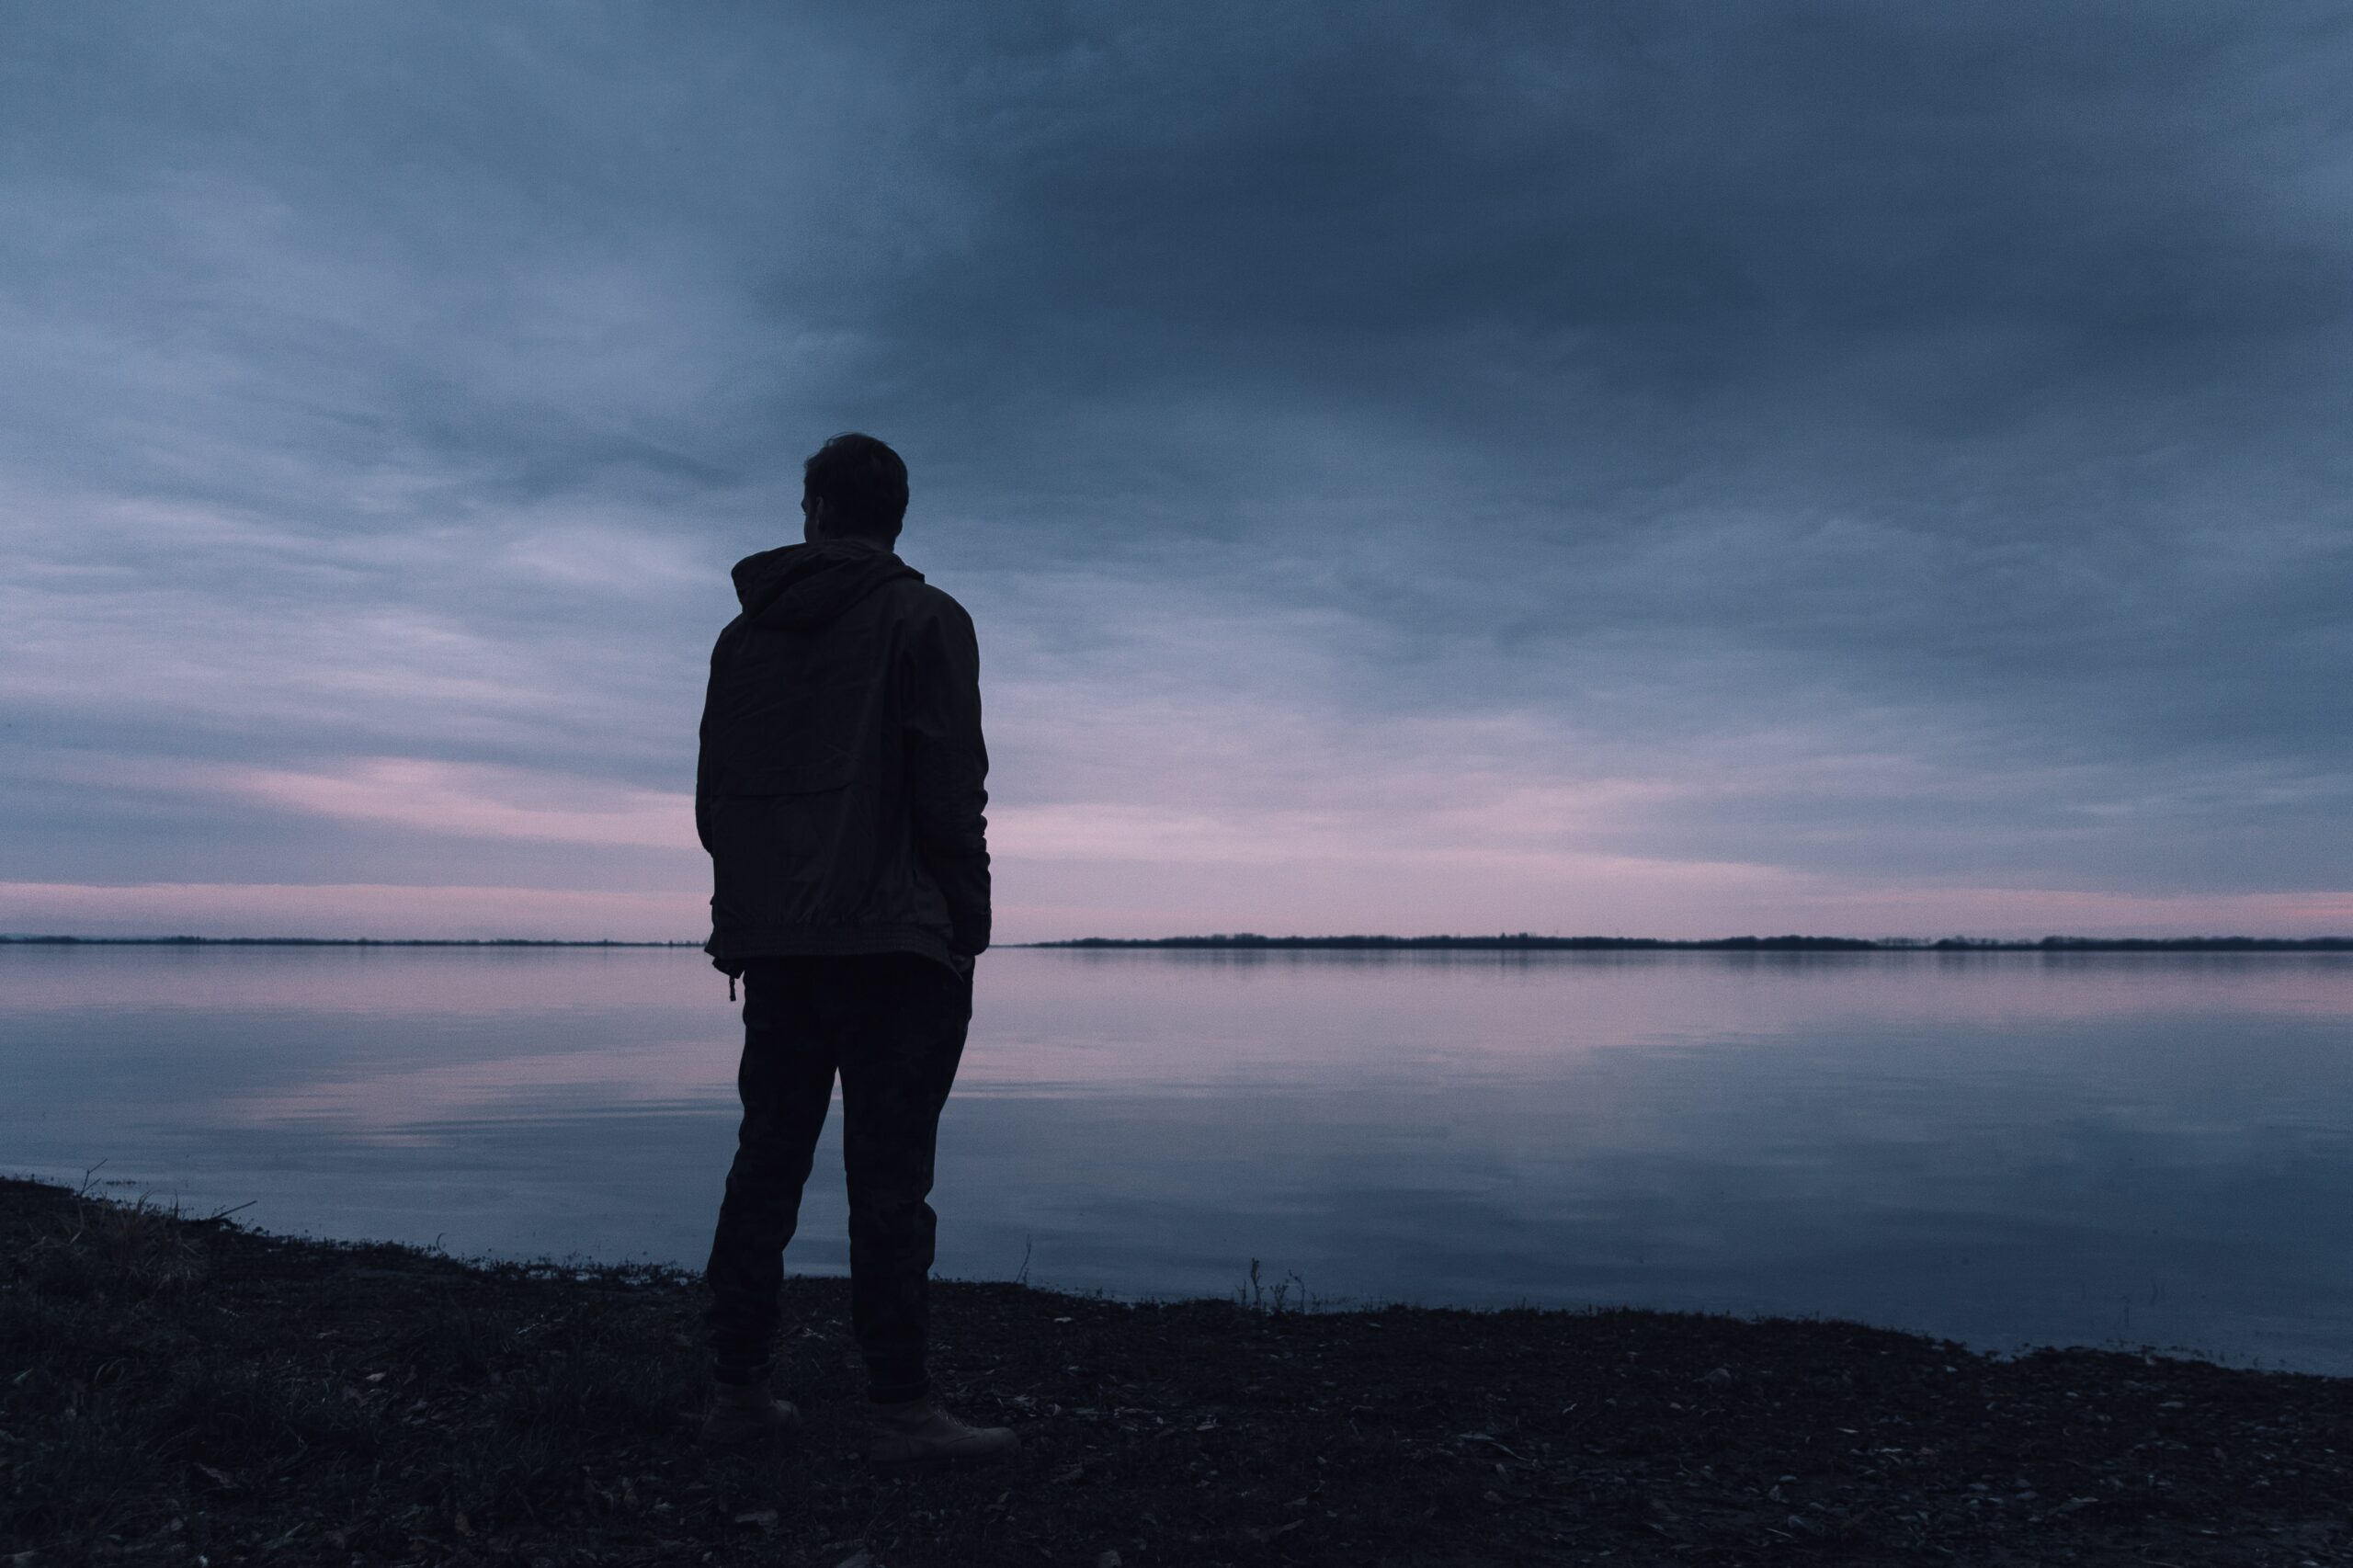 A silhouette of a cis man looking out over a lake.